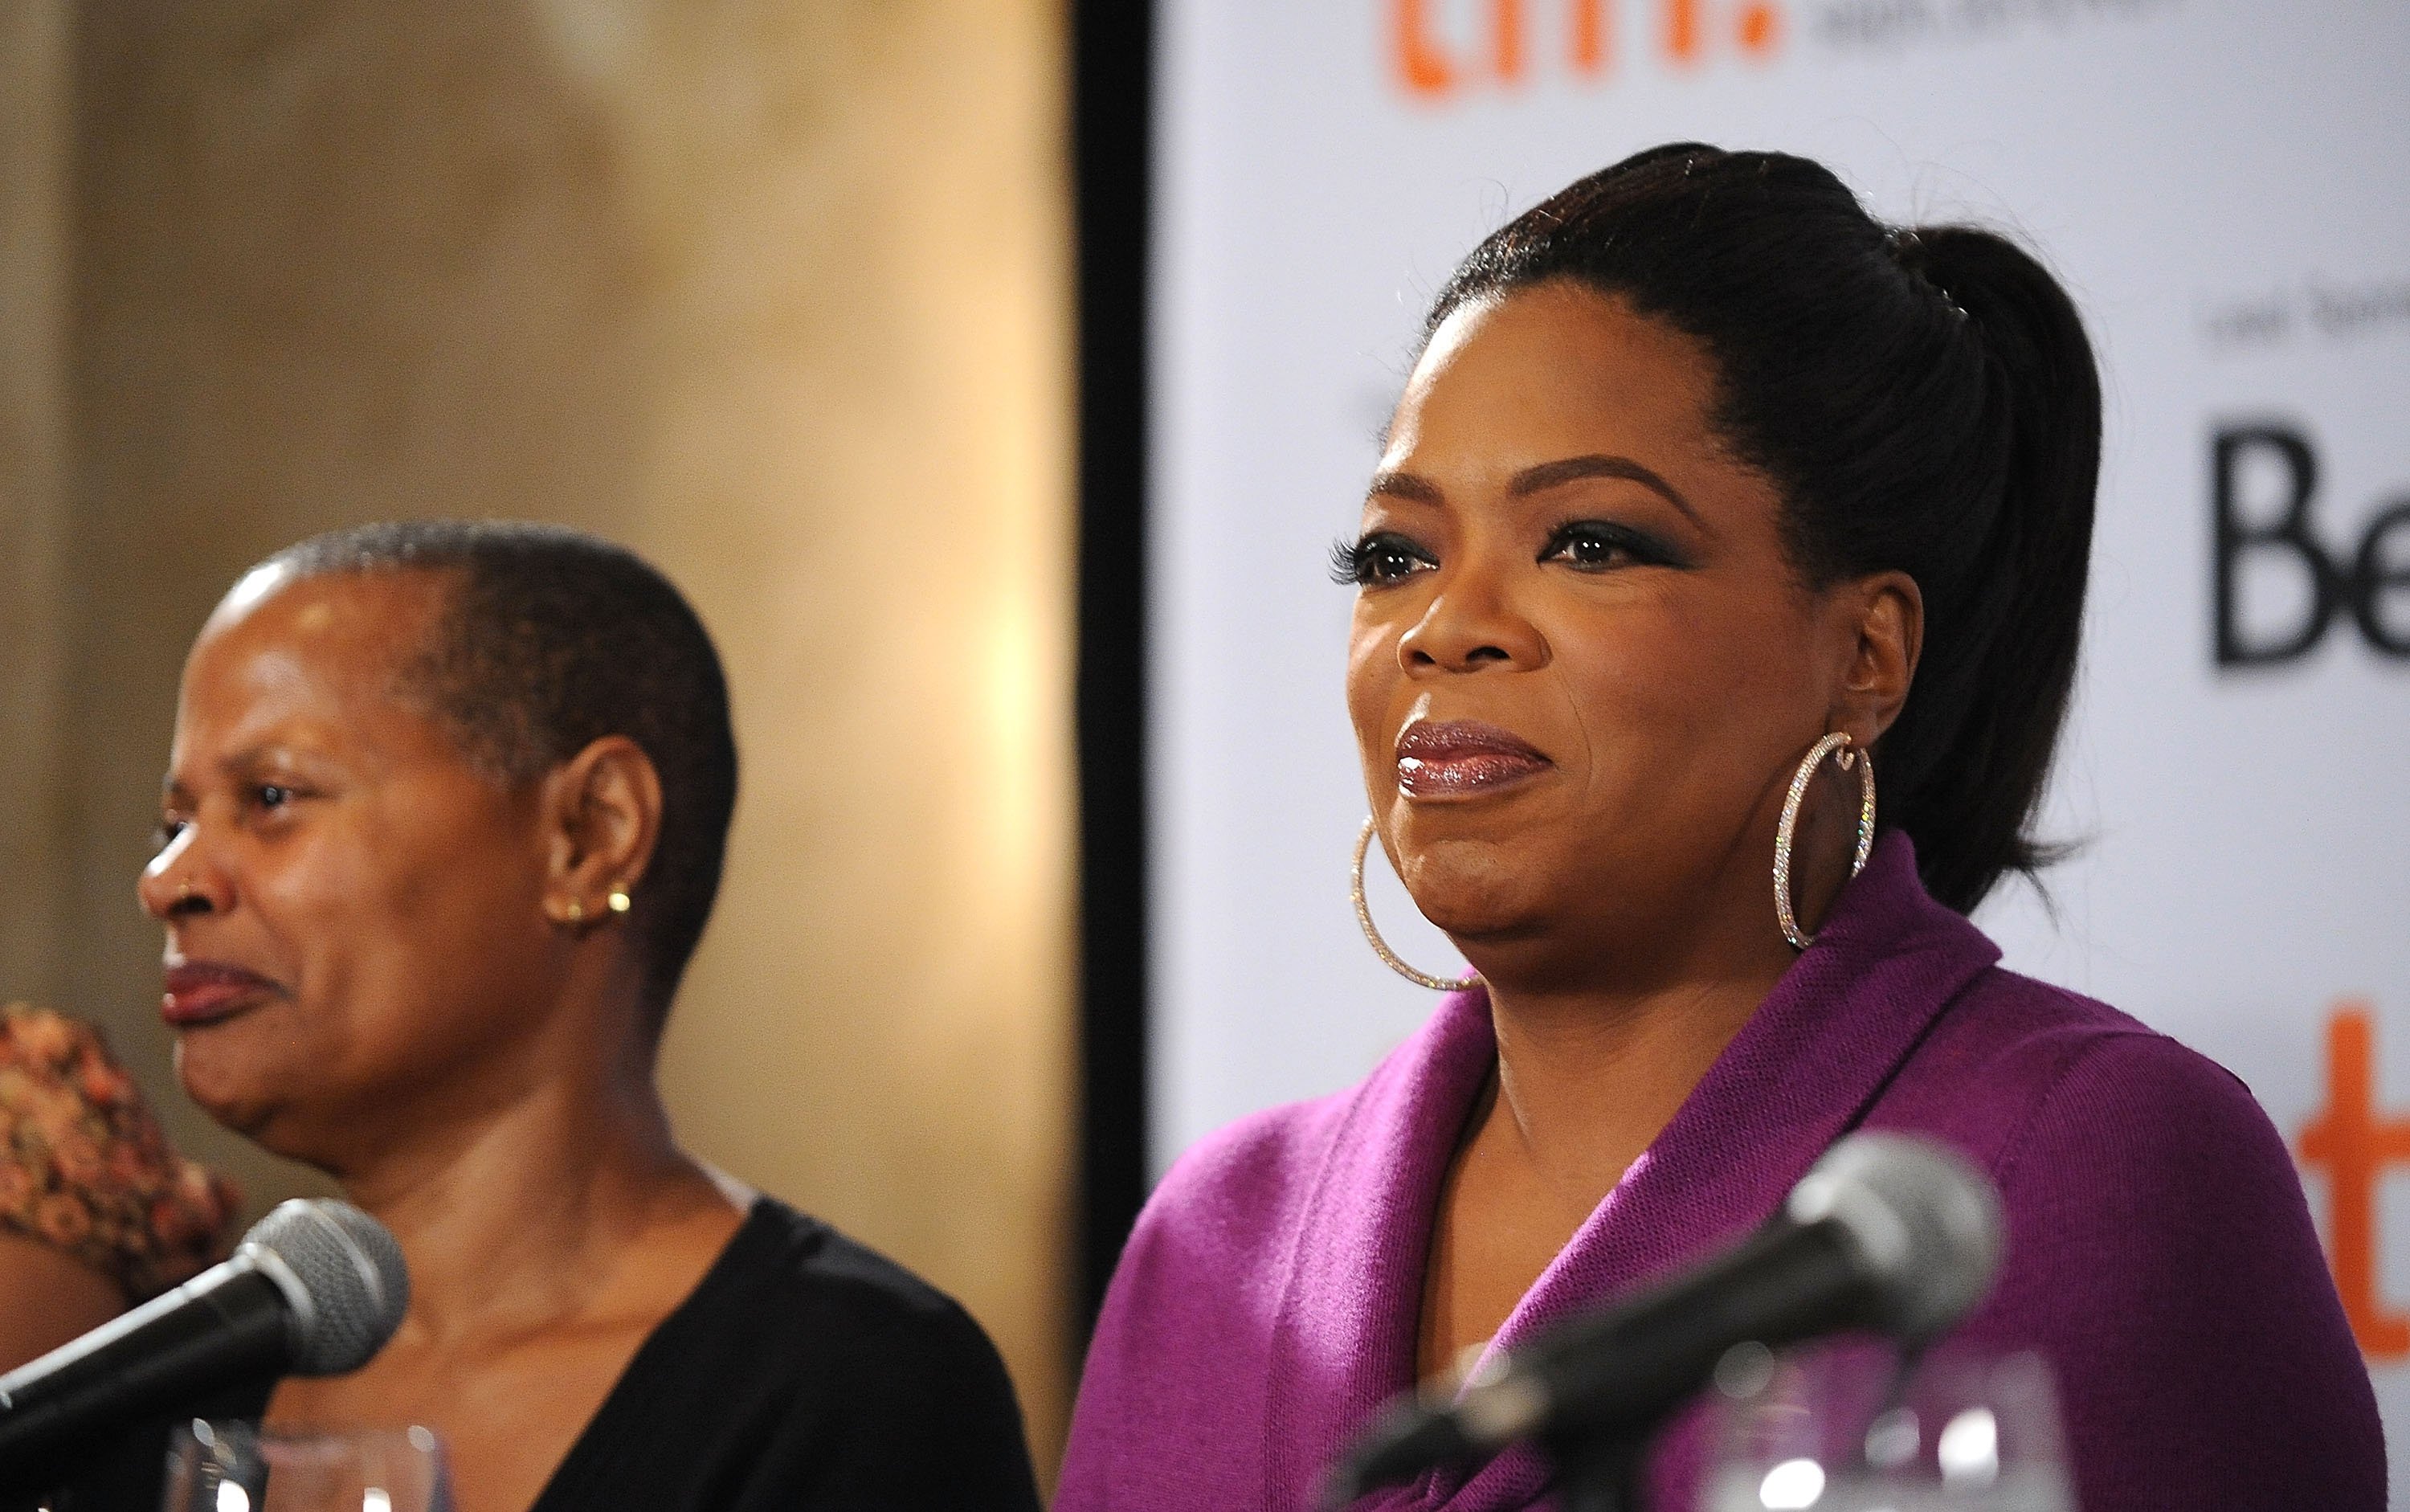 Executive producer Oprah Winfrey speaks onstage at the "Precious: Based On The Novel "Push" By Sapphire" press conference held at the Four Seasons Hotel on September 13, 2009 in Toronto, Canada. | Source: Getty Images